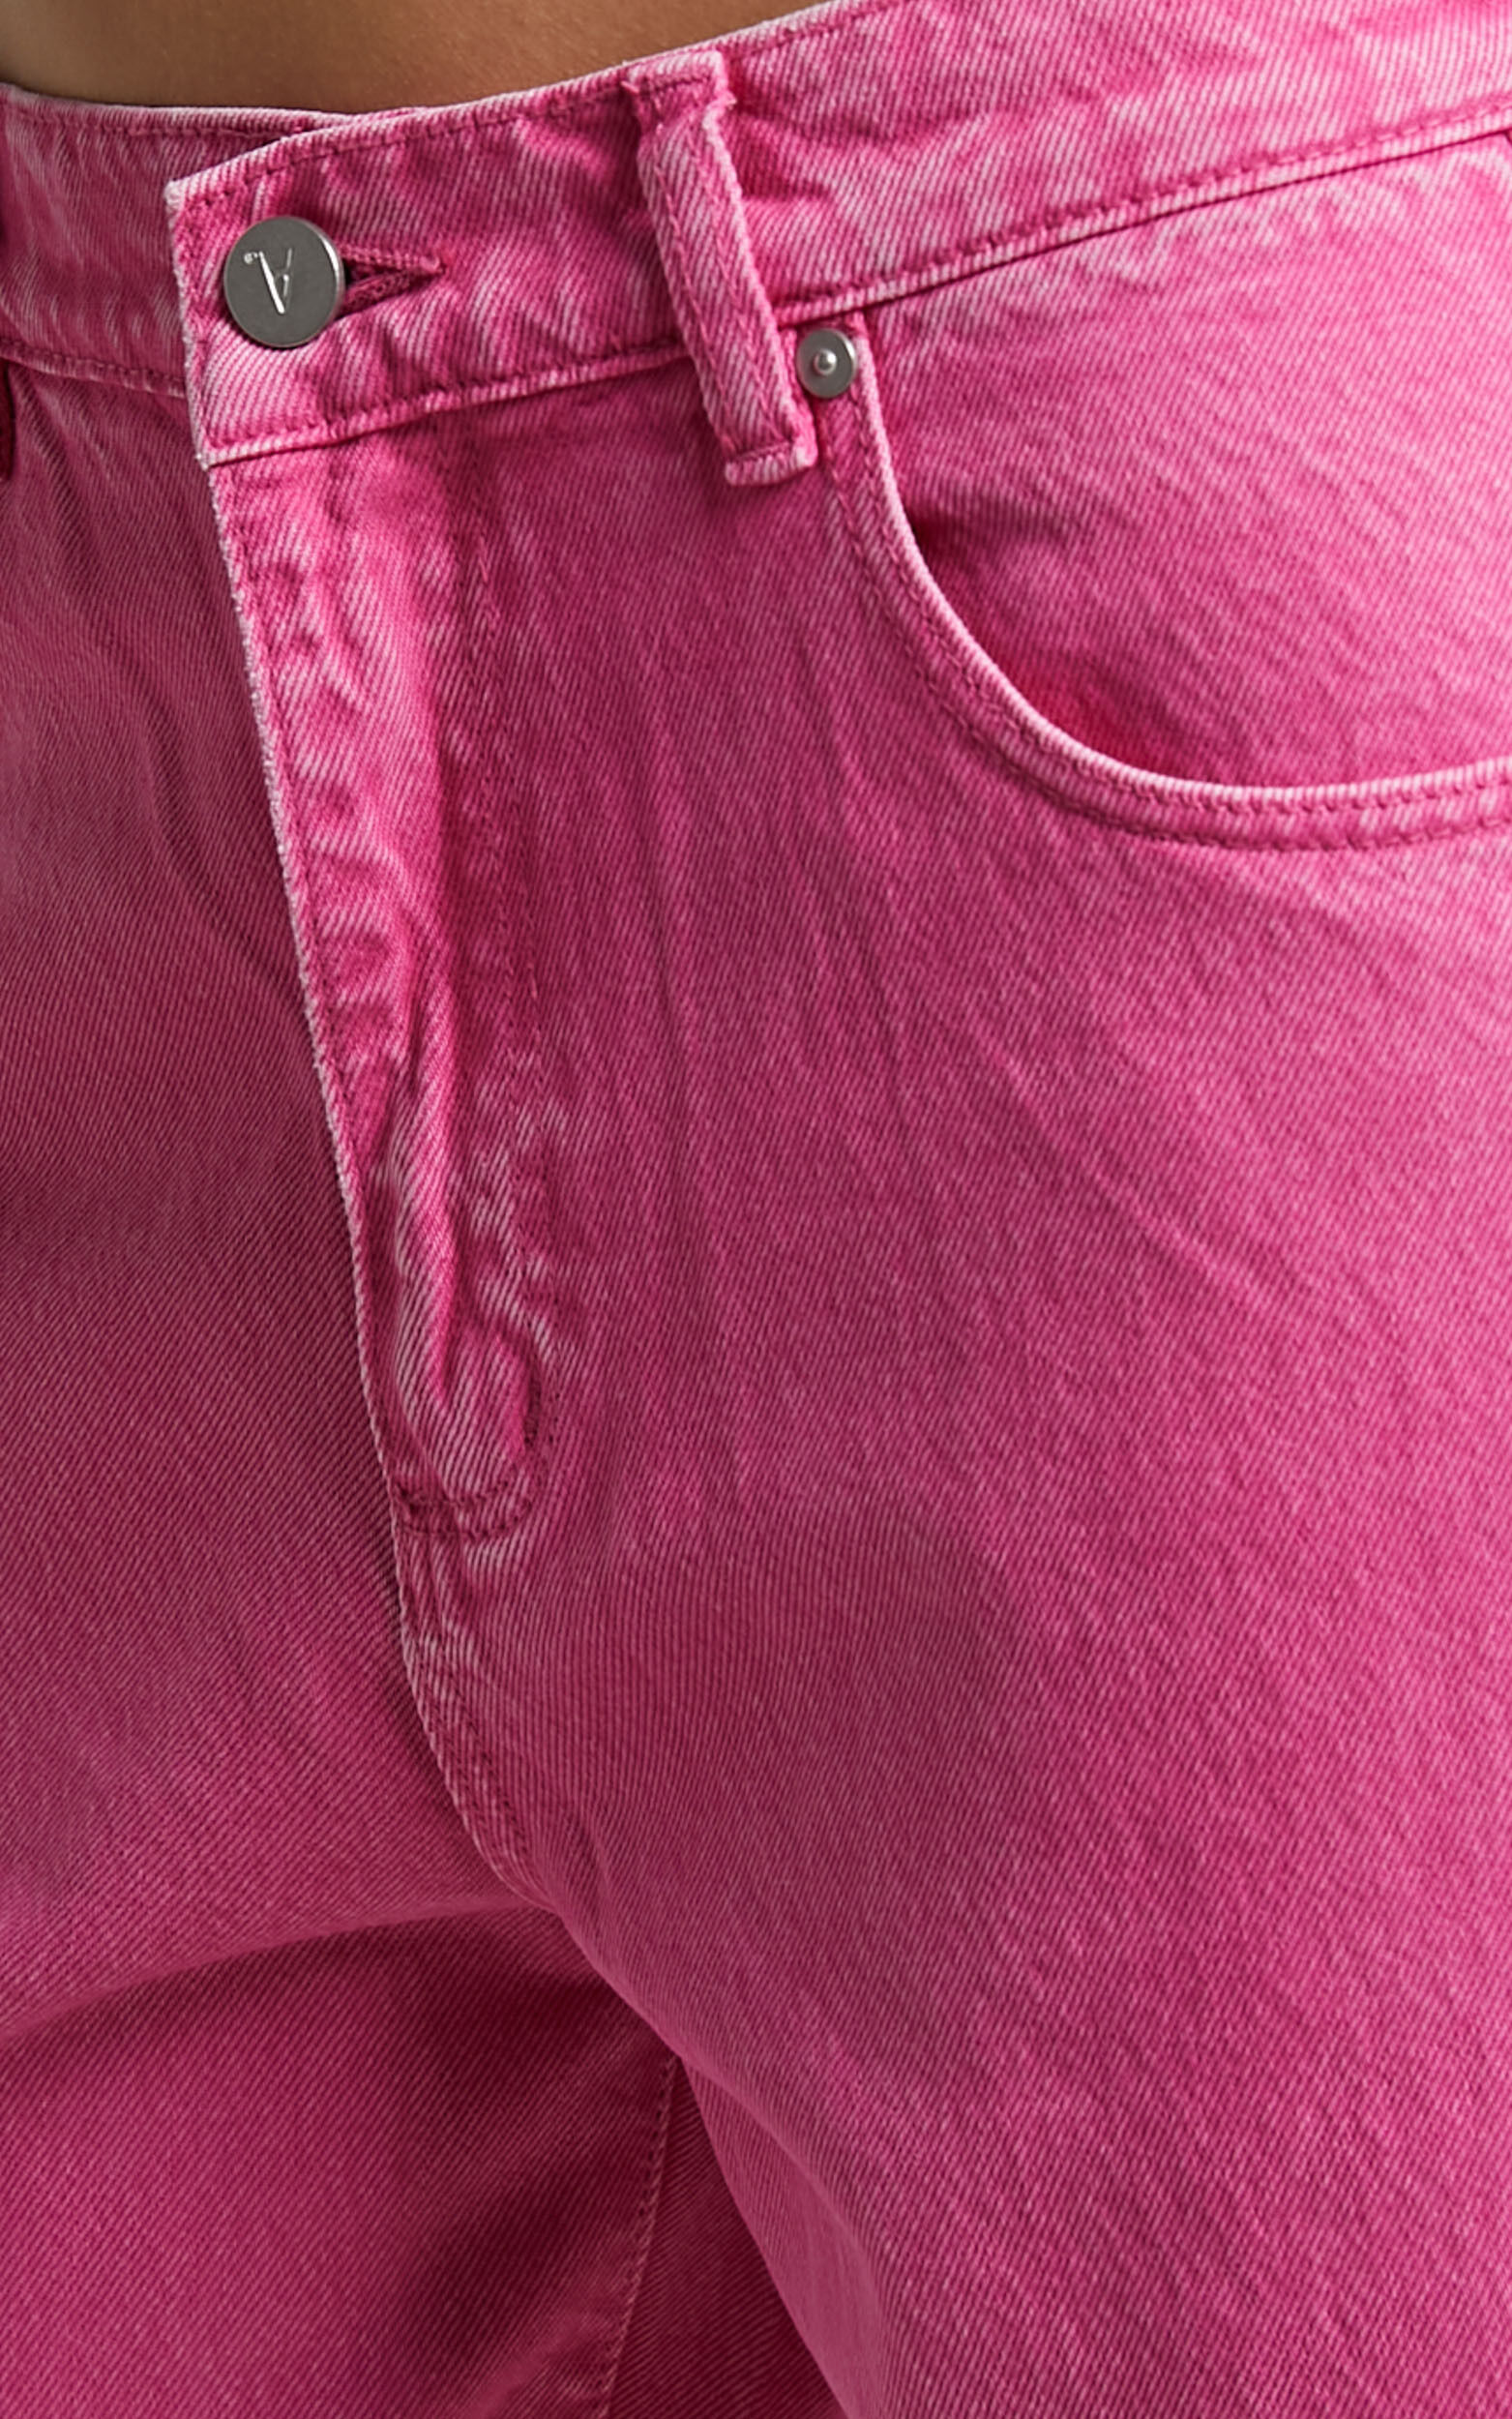 Abrand - A Slouch Jean Super Pink Stoned Jeans in Super Pink